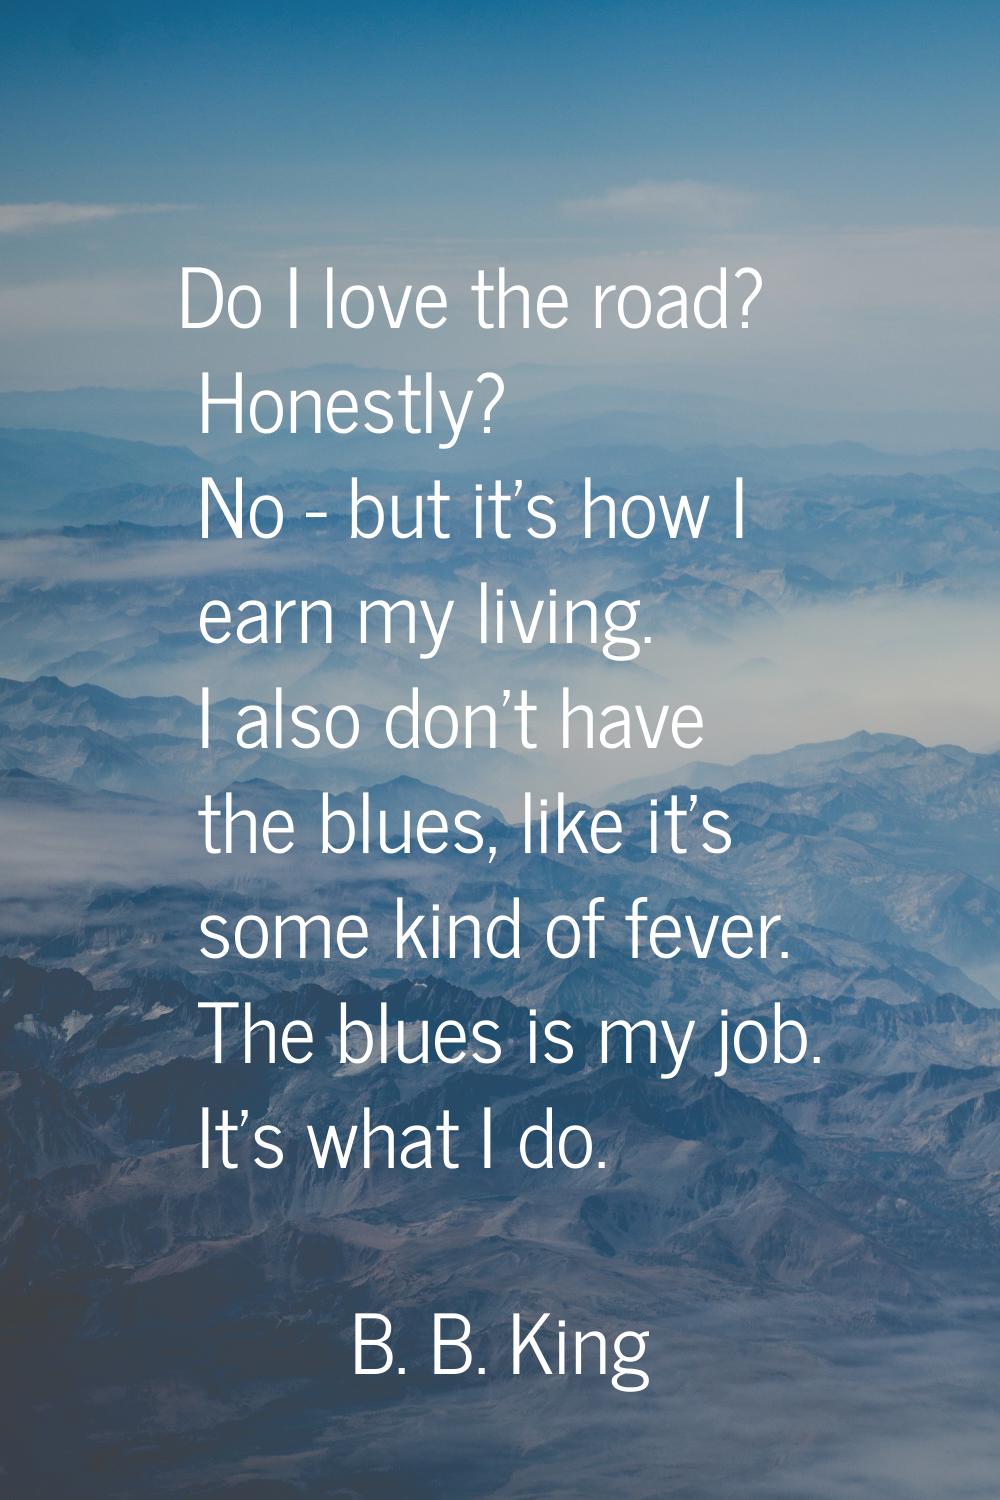 Do I love the road? Honestly? No - but it's how I earn my living. I also don't have the blues, like